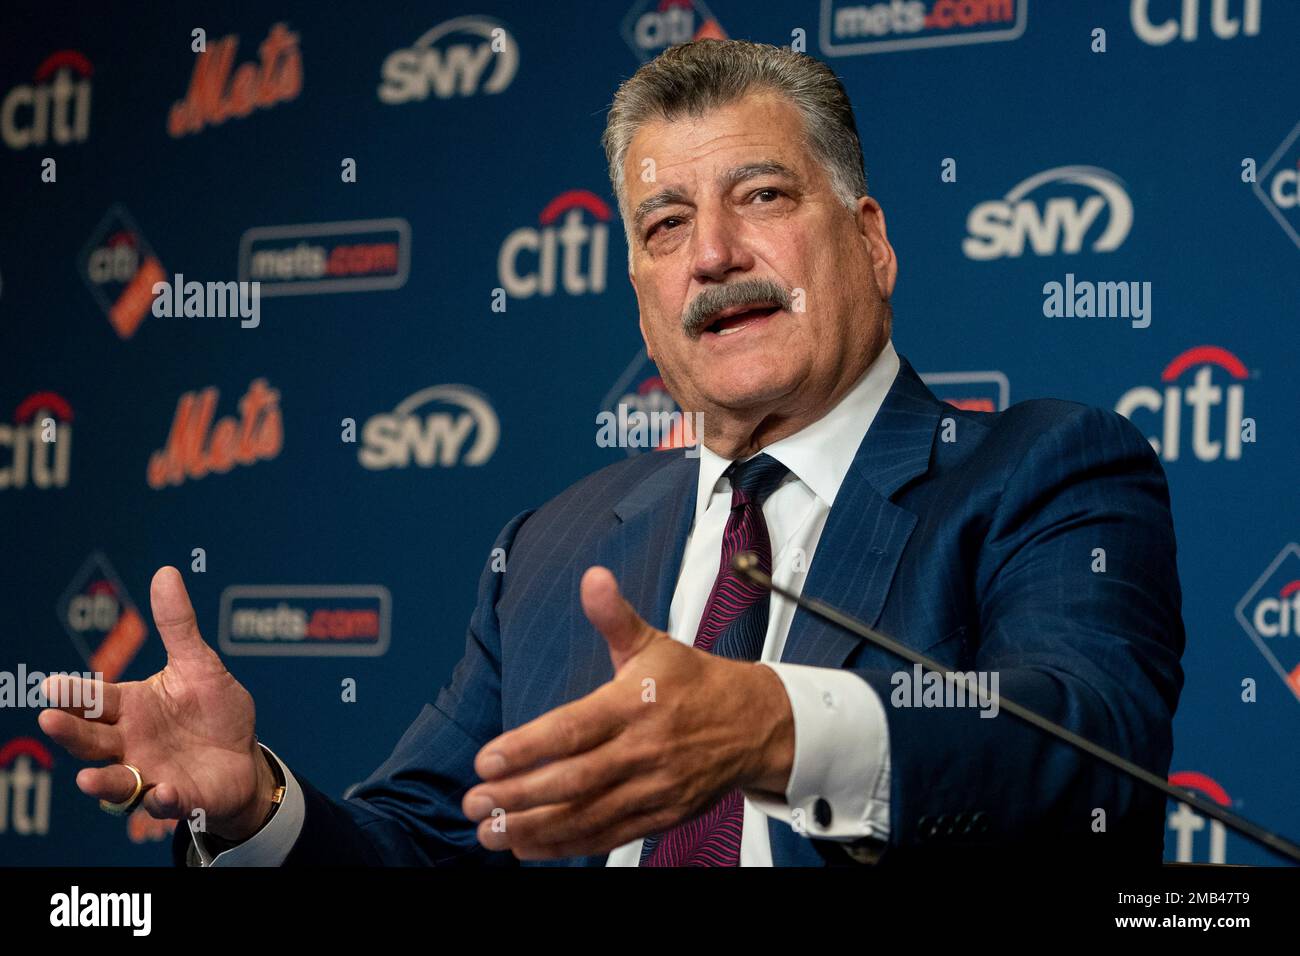 New York Mets announcer and former player Keith Hernandez speaks to the  media during a news conference before a baseball game between the Mets and  Miami Marlins, Saturday, July 9, 2022, in